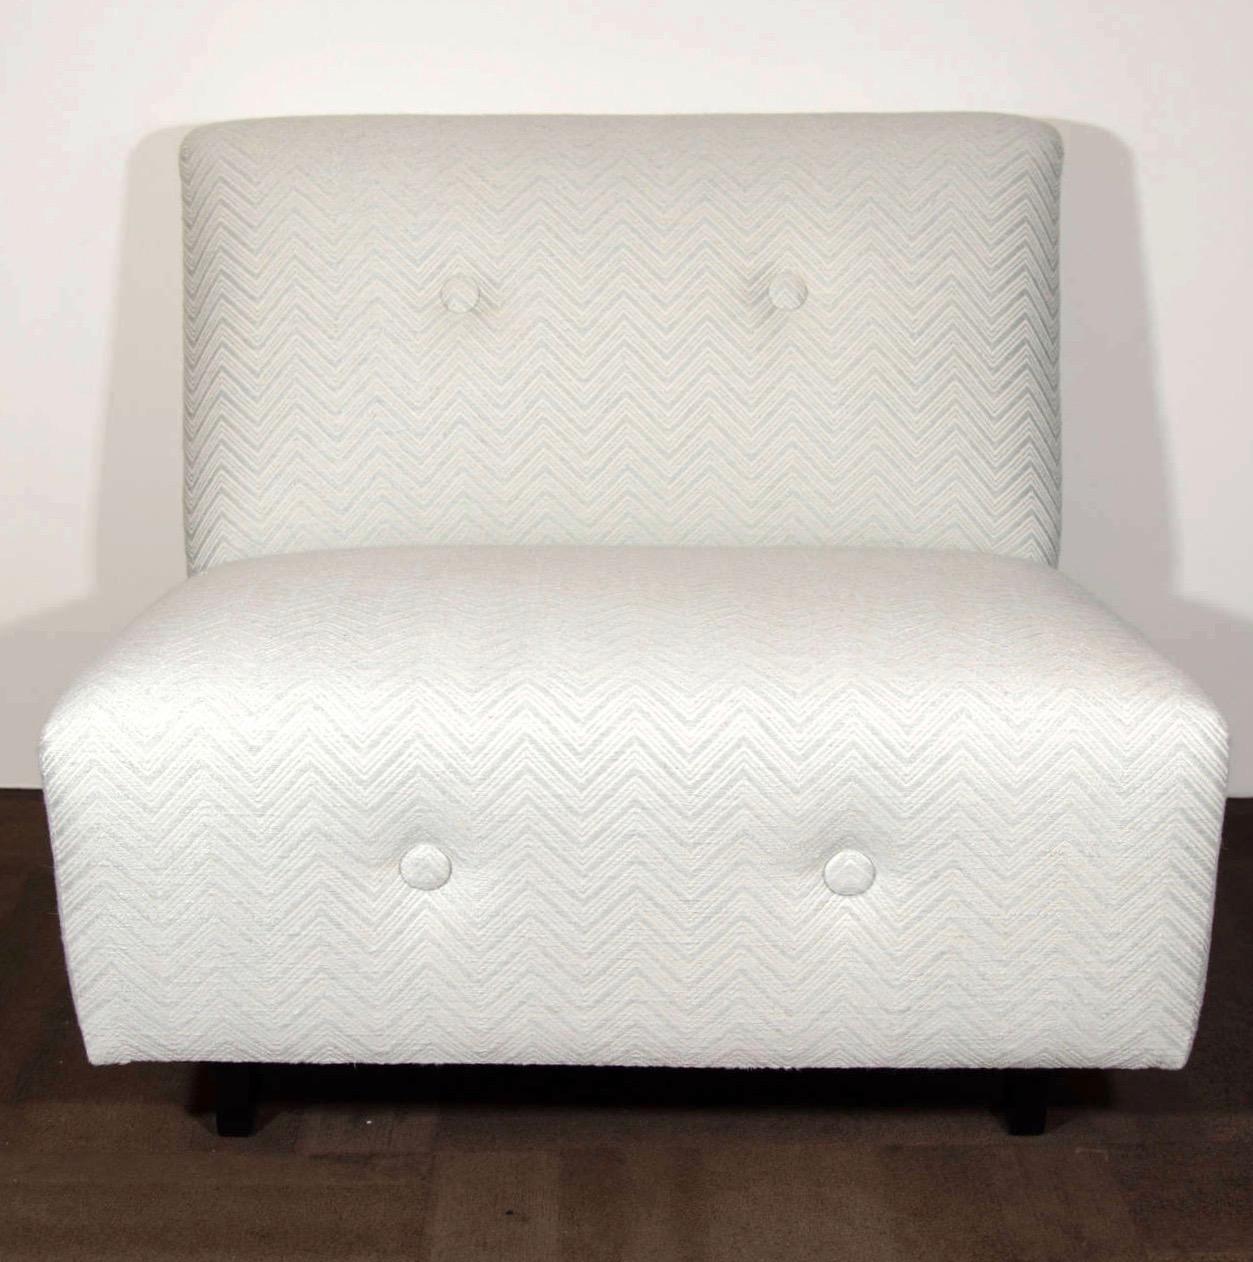 Pair of Art Deco slipper chairs upholstered in woven Scalamandre fabric with a gorgeous chevron pattern in hues of ivory and matte silver. The chairs have large classic square back and seat design Features large button accents along the back and